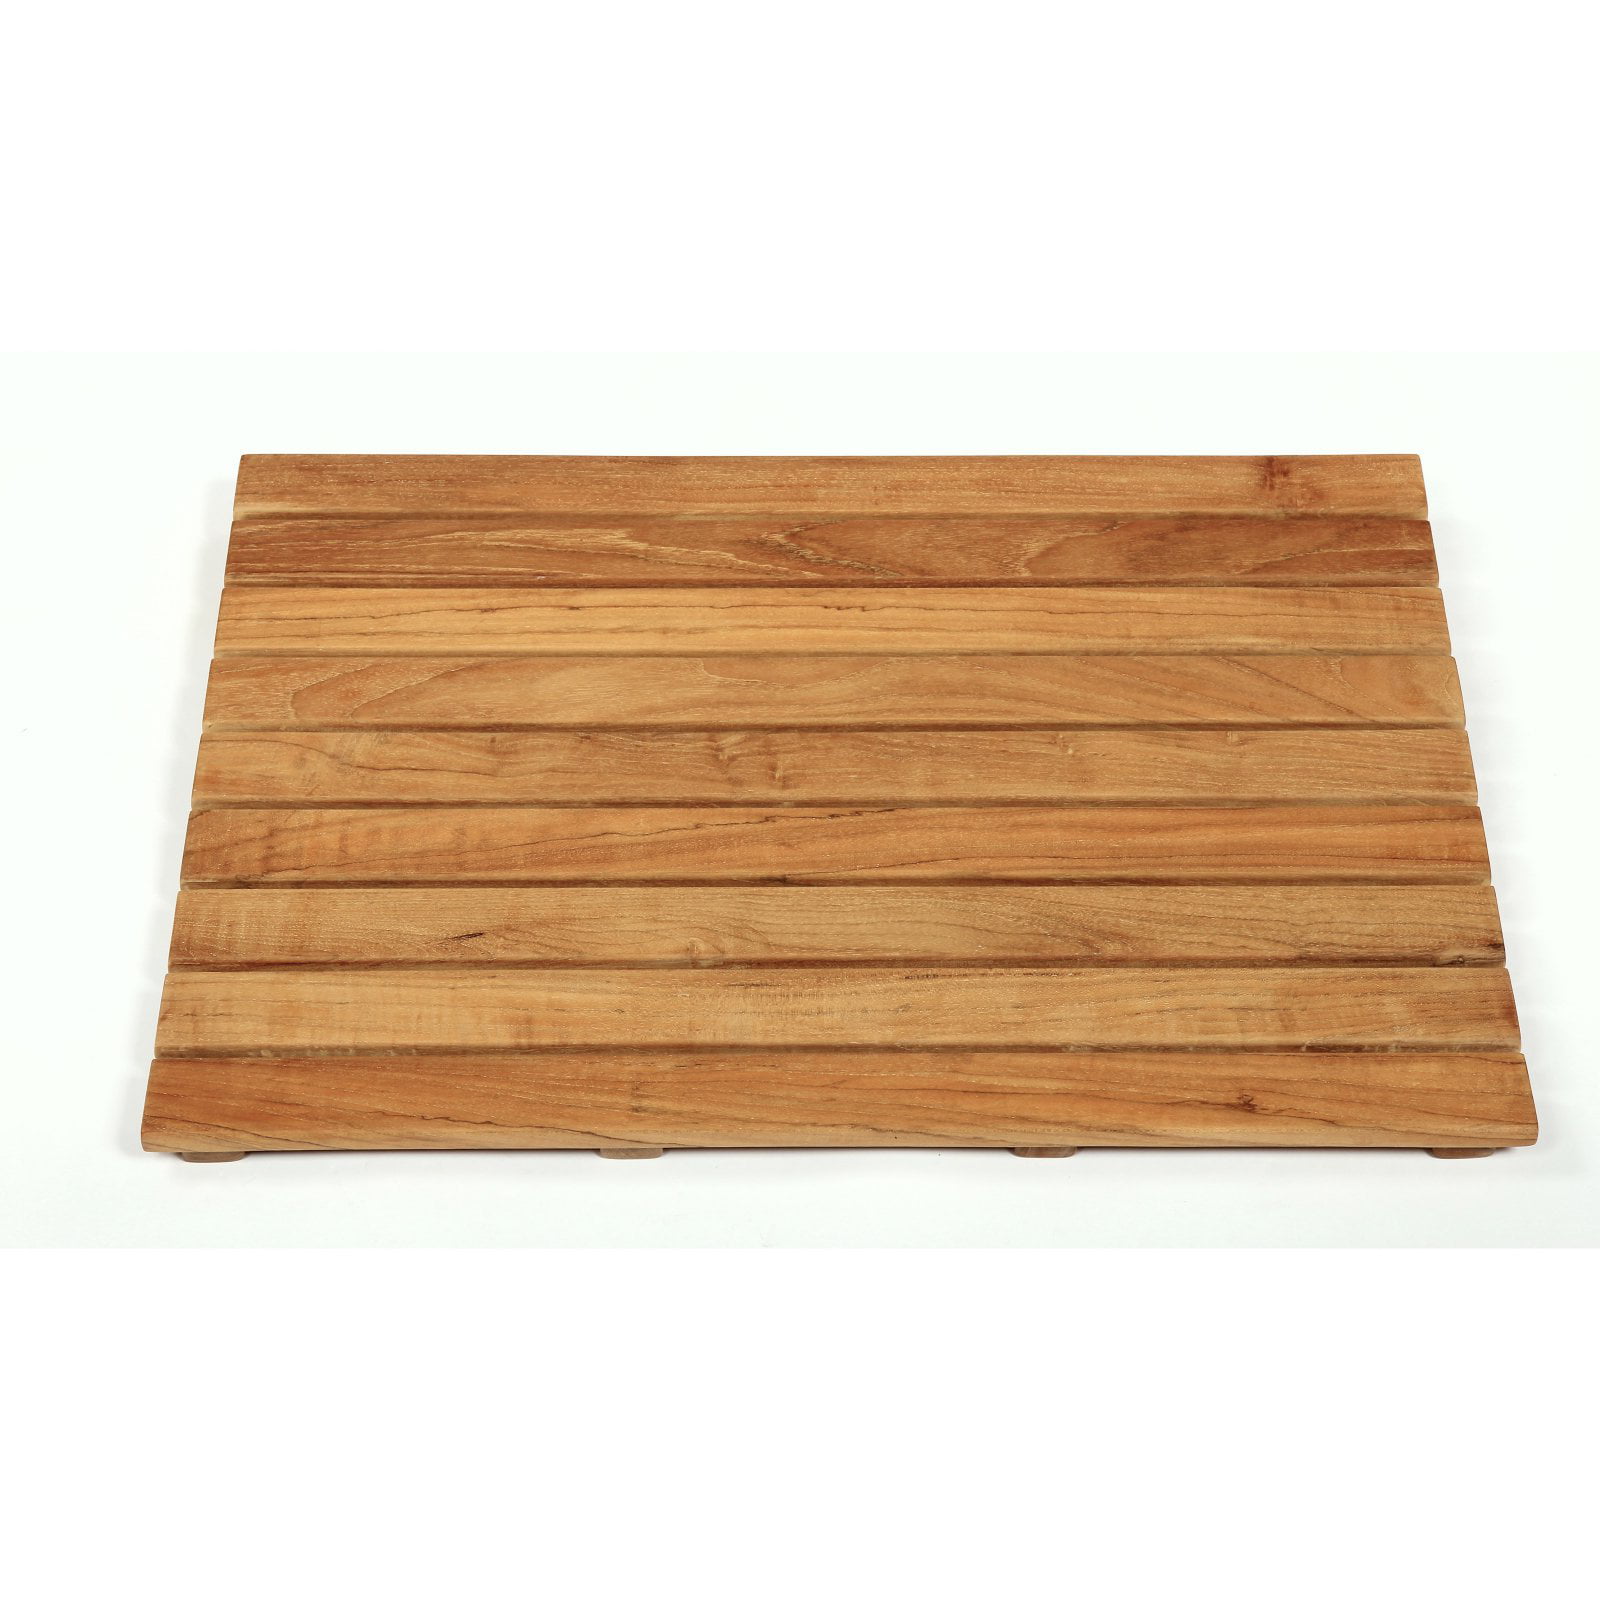 Details about   Creative Bath Eco Styles Bath Mat Bamboo 